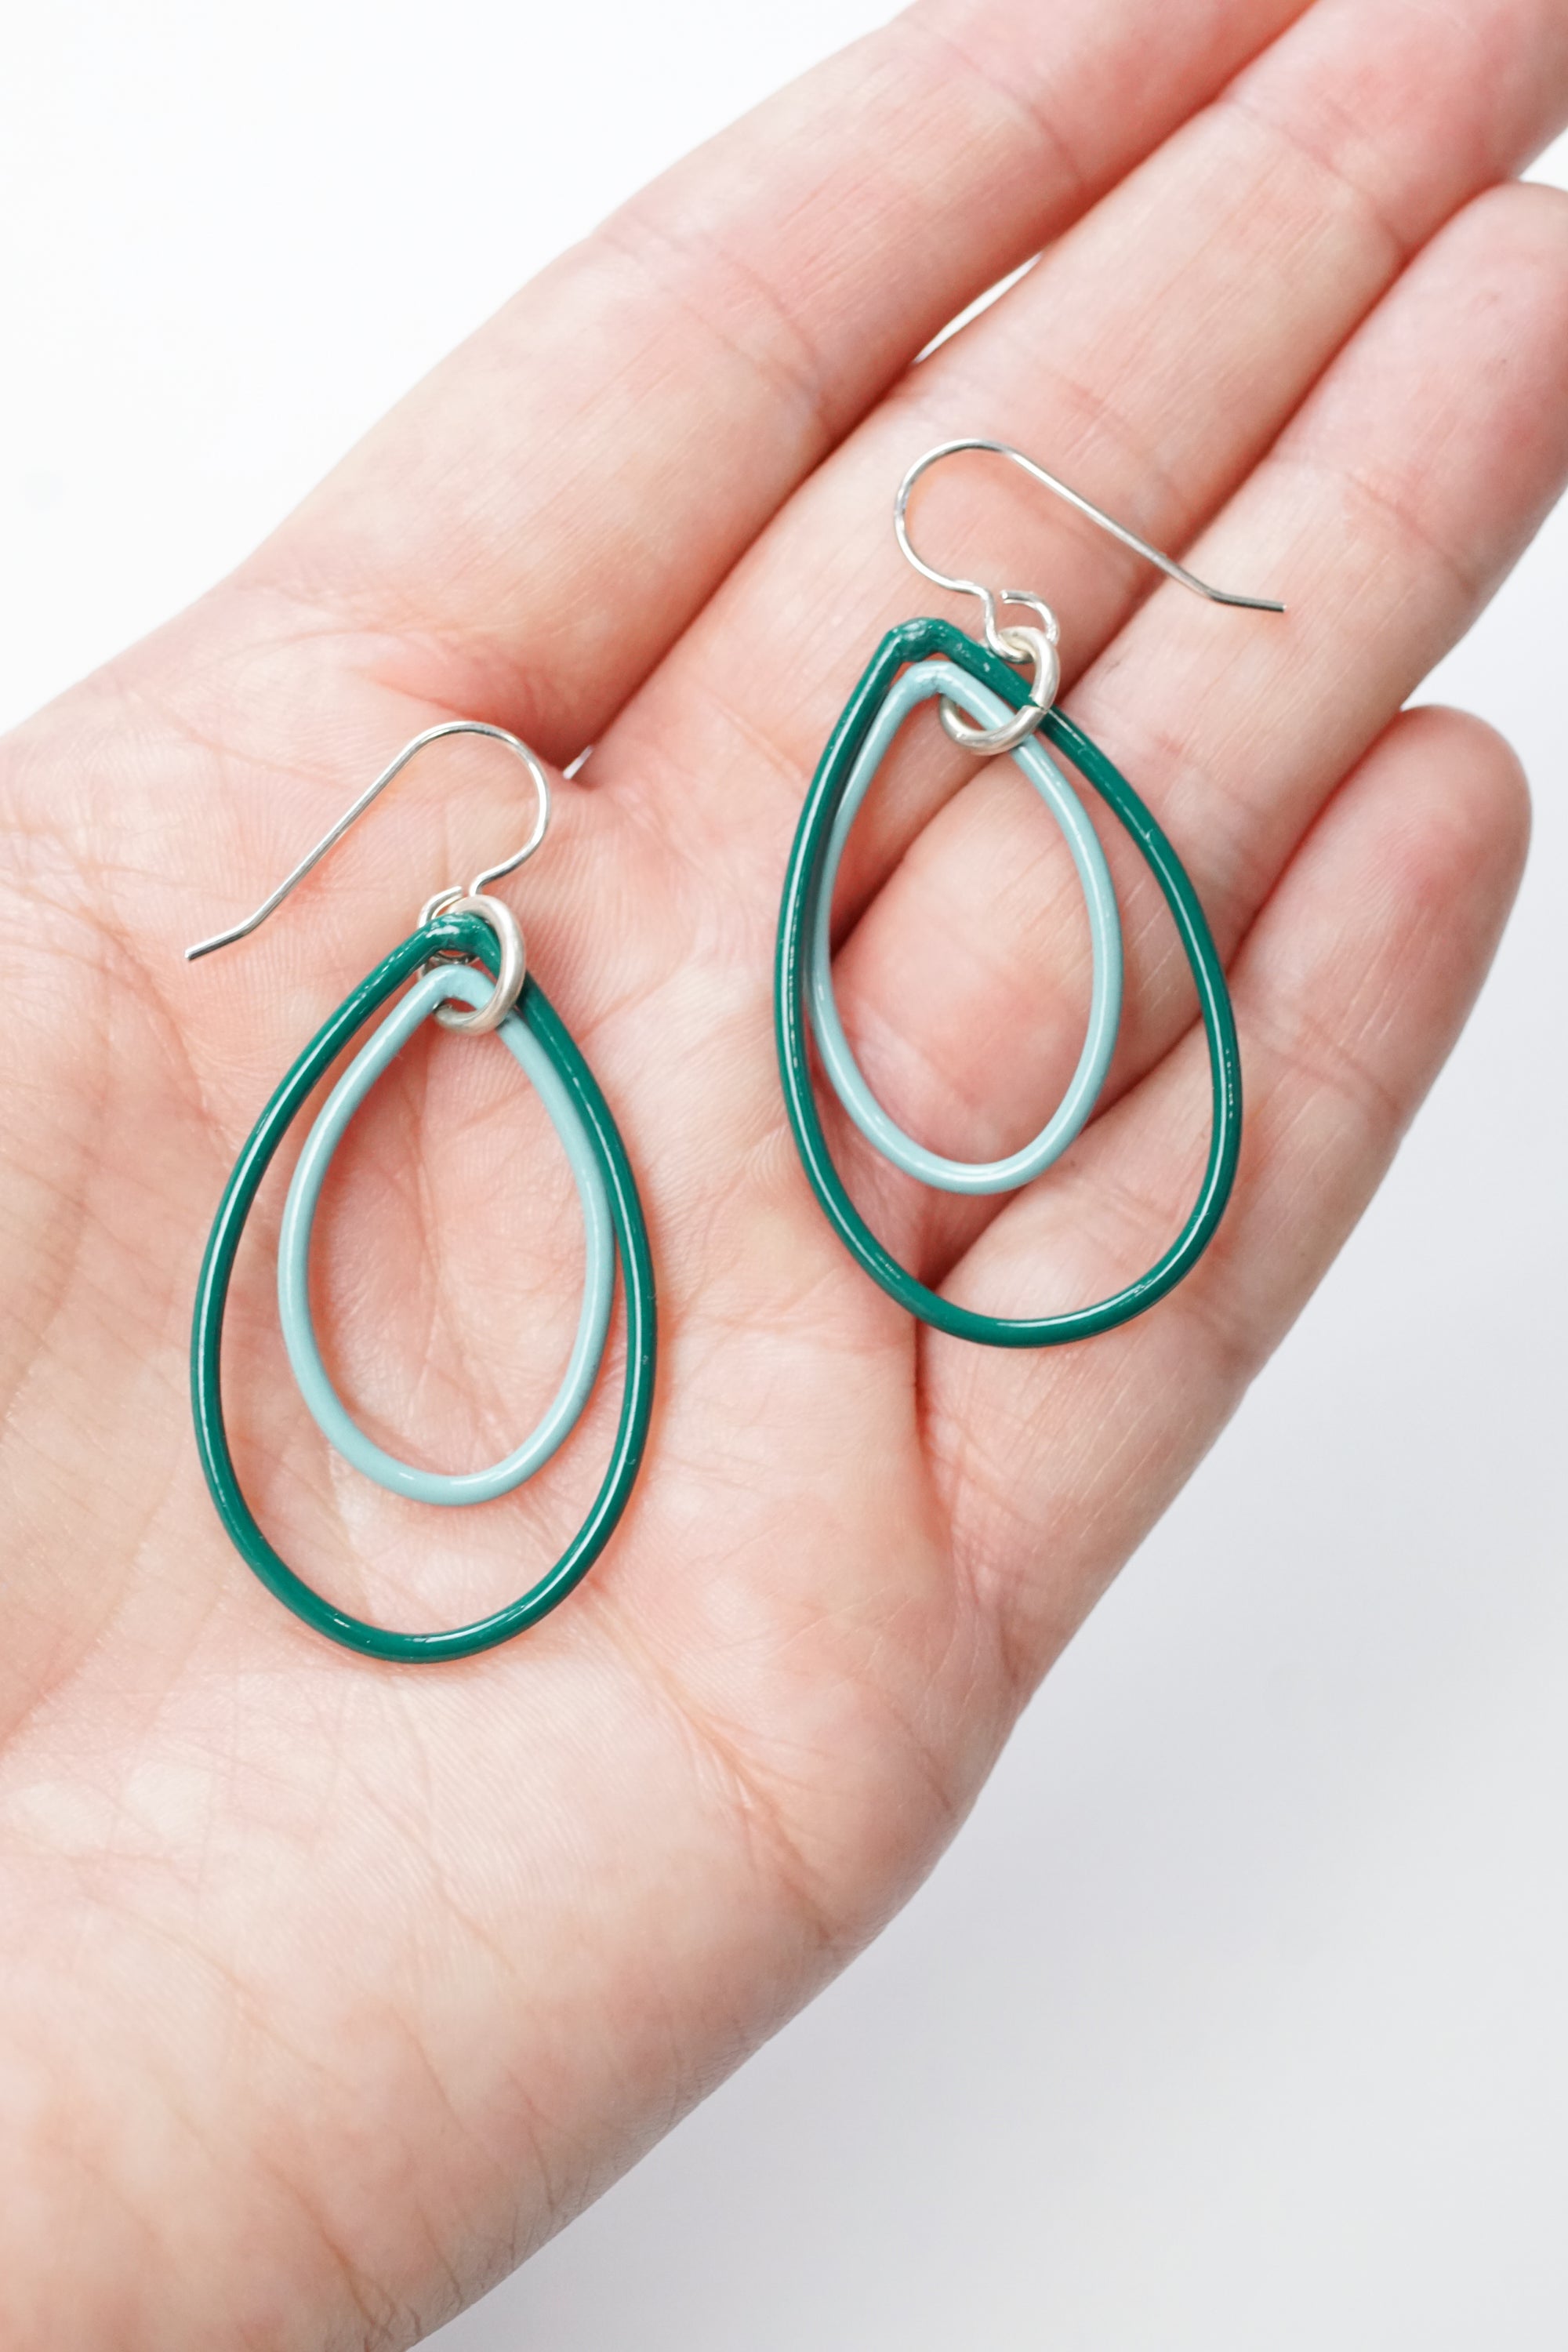 Nellie earrings in Emerald Green and Faded Teal